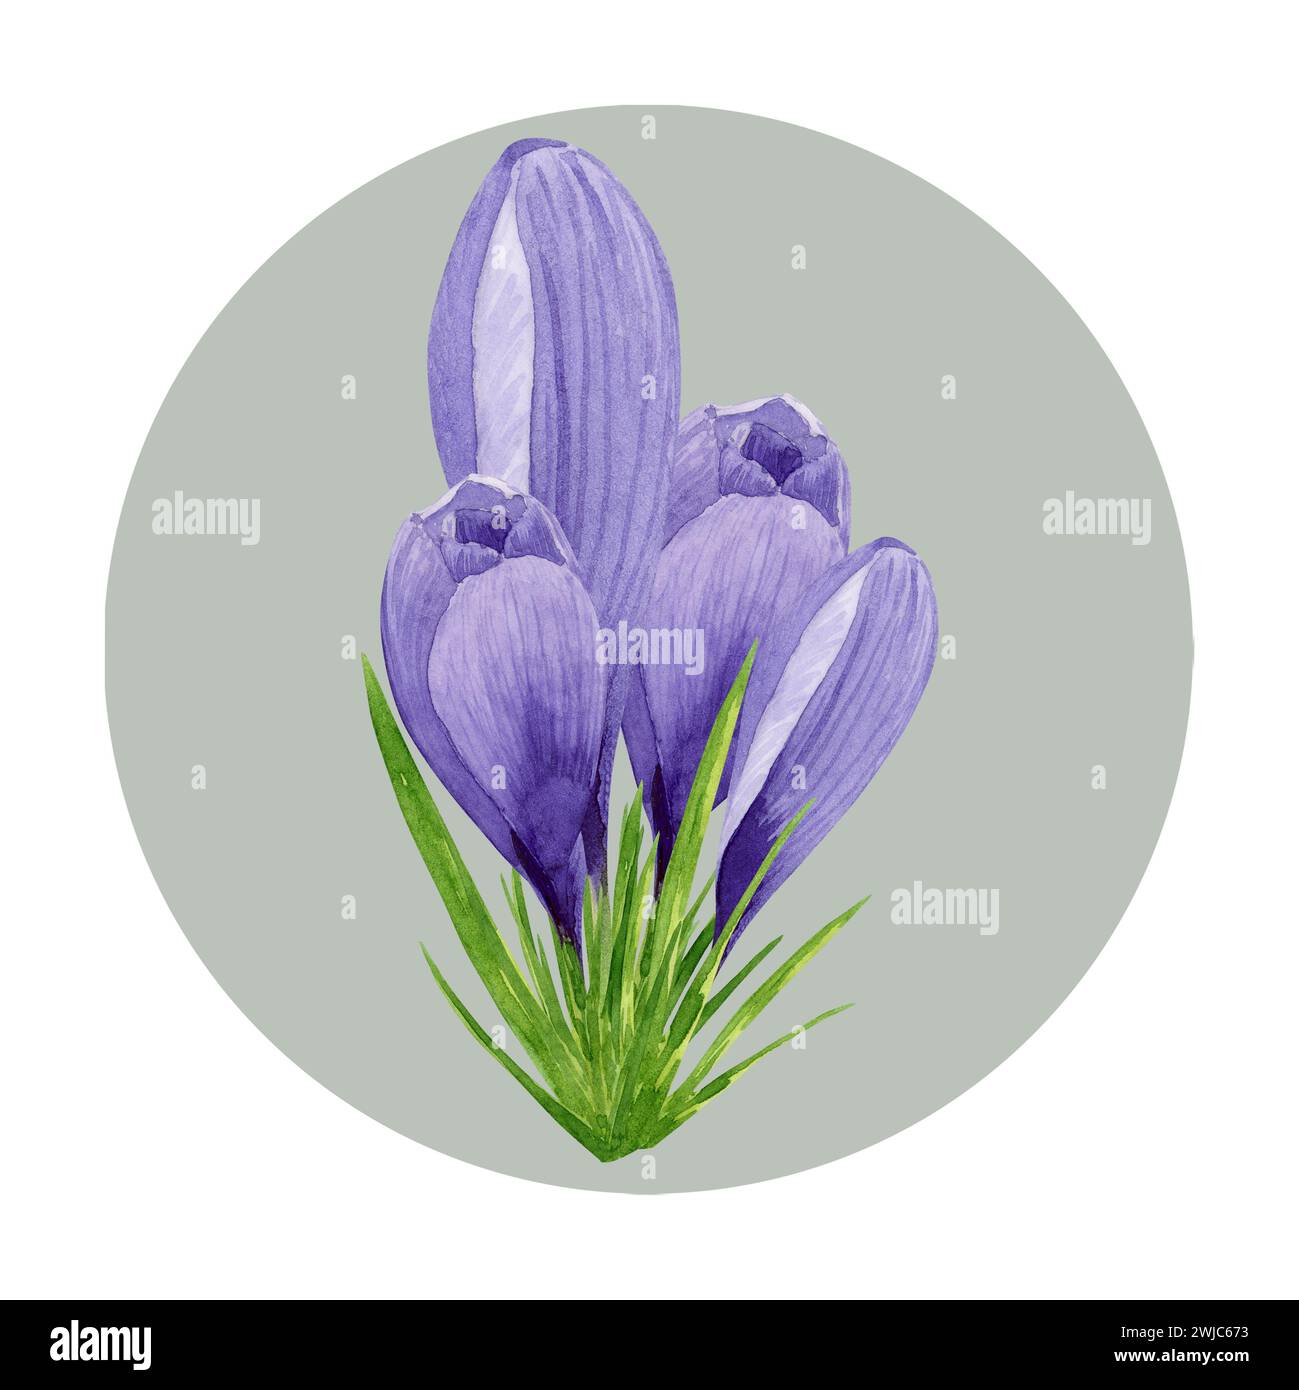 Purple crocuses composition, spring flowers. Hand painted watercolor floral illustration with green circle background. Stock Photo